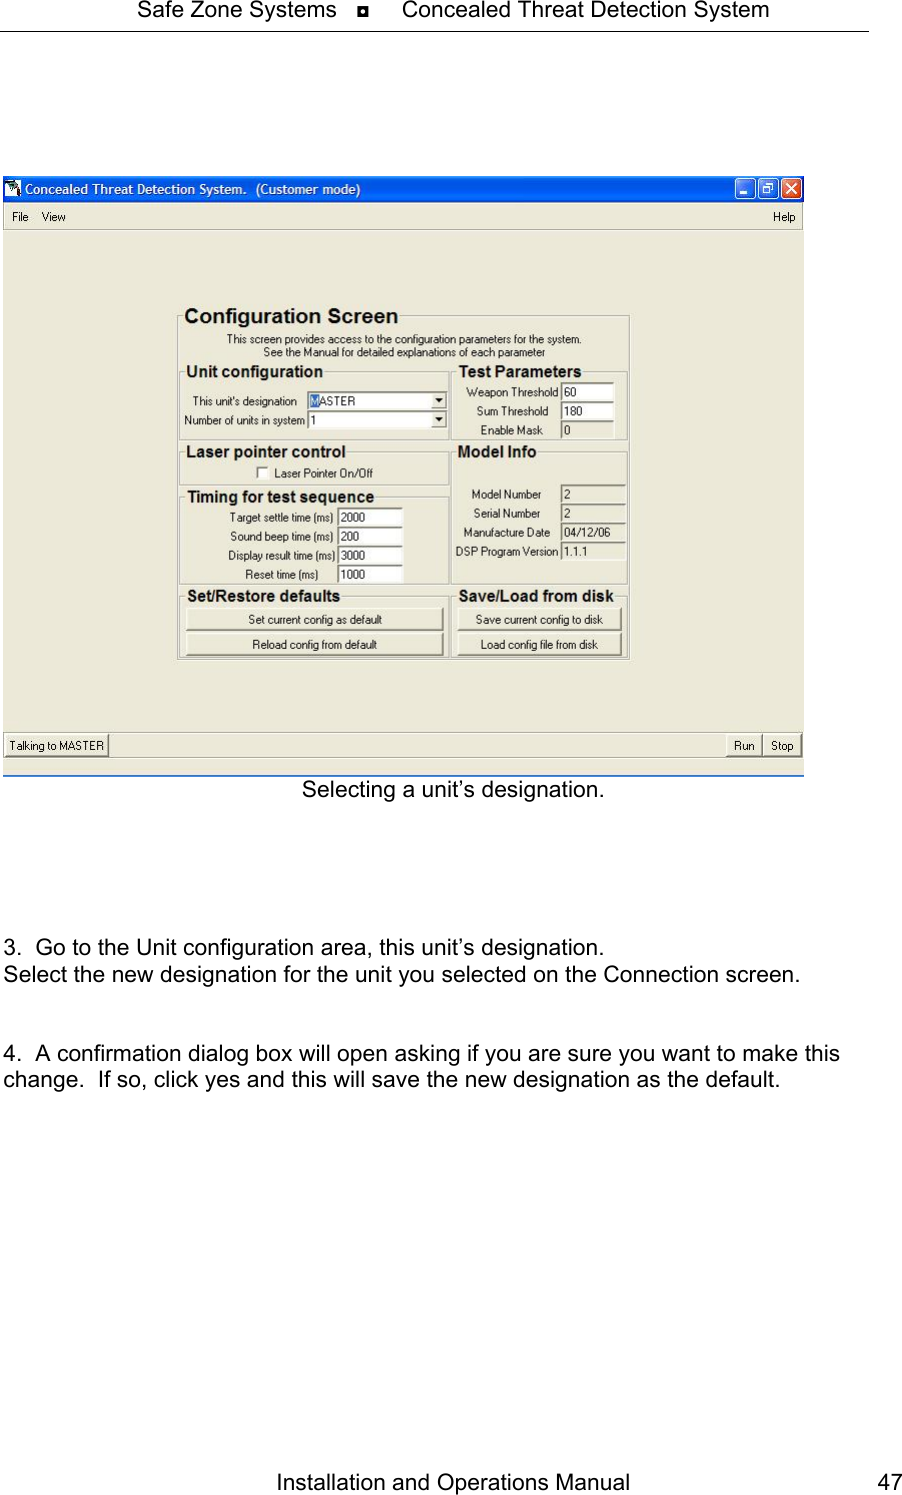 Safe Zone Systems   ◘     Concealed Threat Detection System       Selecting a unit’s designation.      3.  Go to the Unit configuration area, this unit’s designation. Select the new designation for the unit you selected on the Connection screen.   4.  A confirmation dialog box will open asking if you are sure you want to make this change.  If so, click yes and this will save the new designation as the default.  Installation and Operations Manual  47